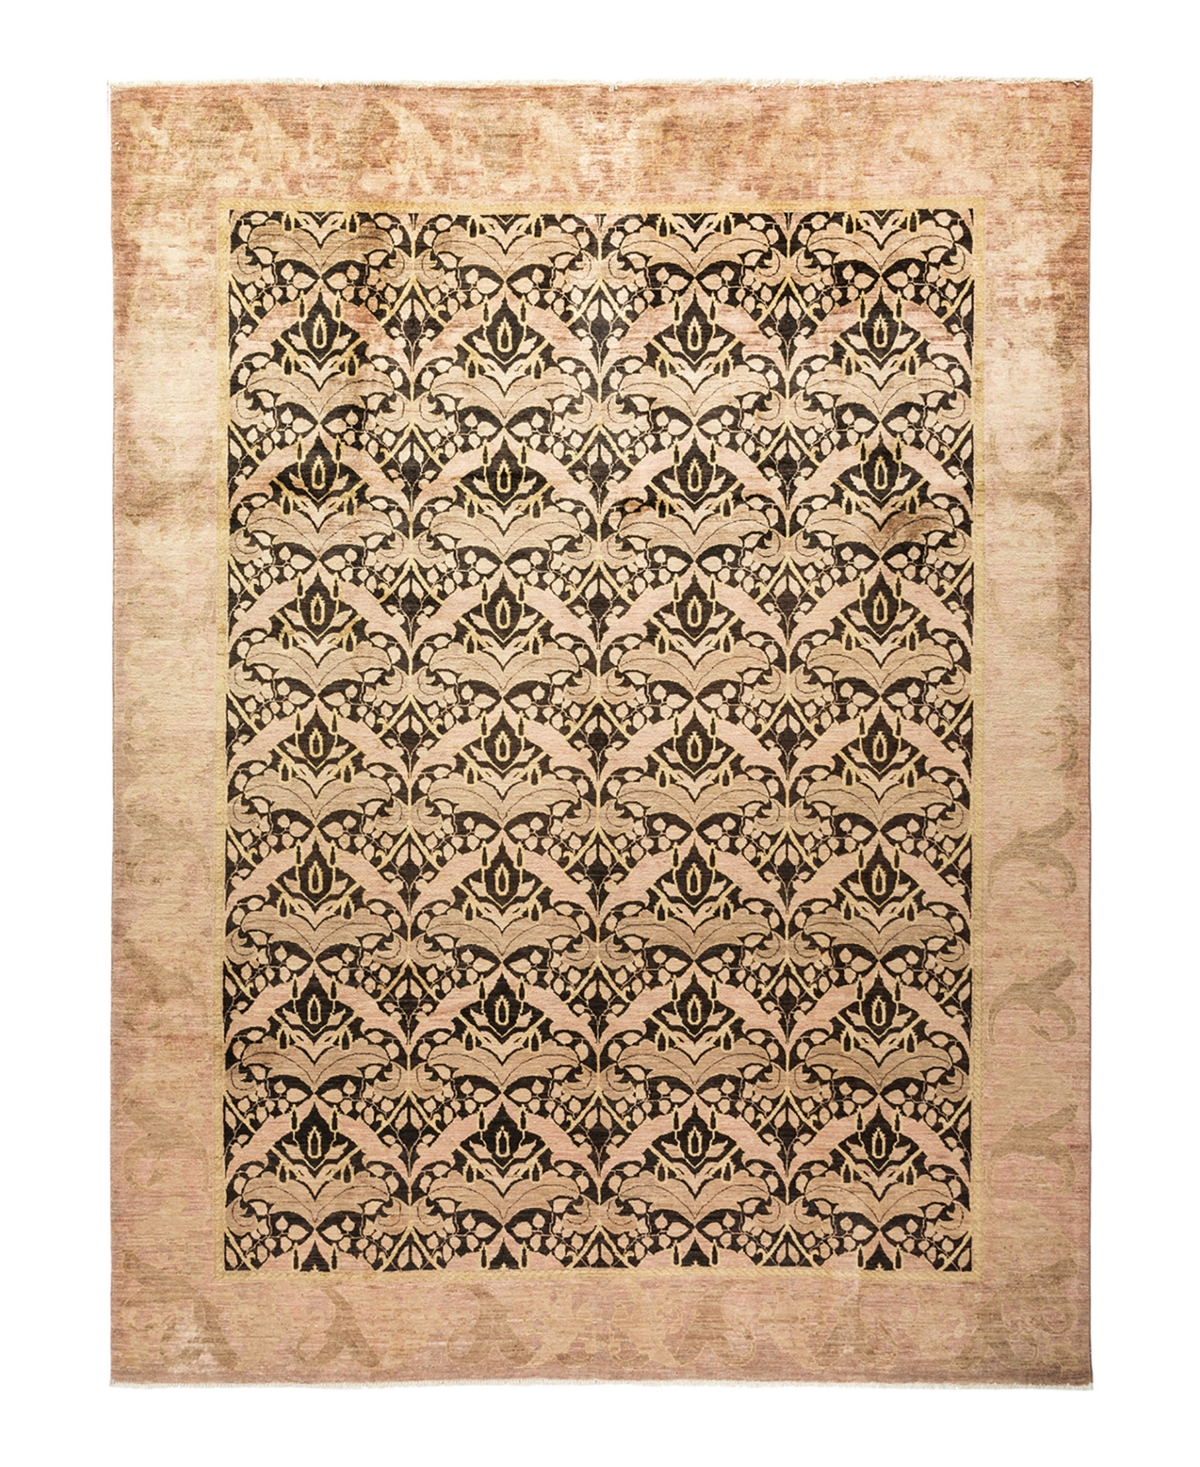 Adorn Hand Woven Rugs Arts and Crafts M1695 9' x 11'10in Area Rug - Black